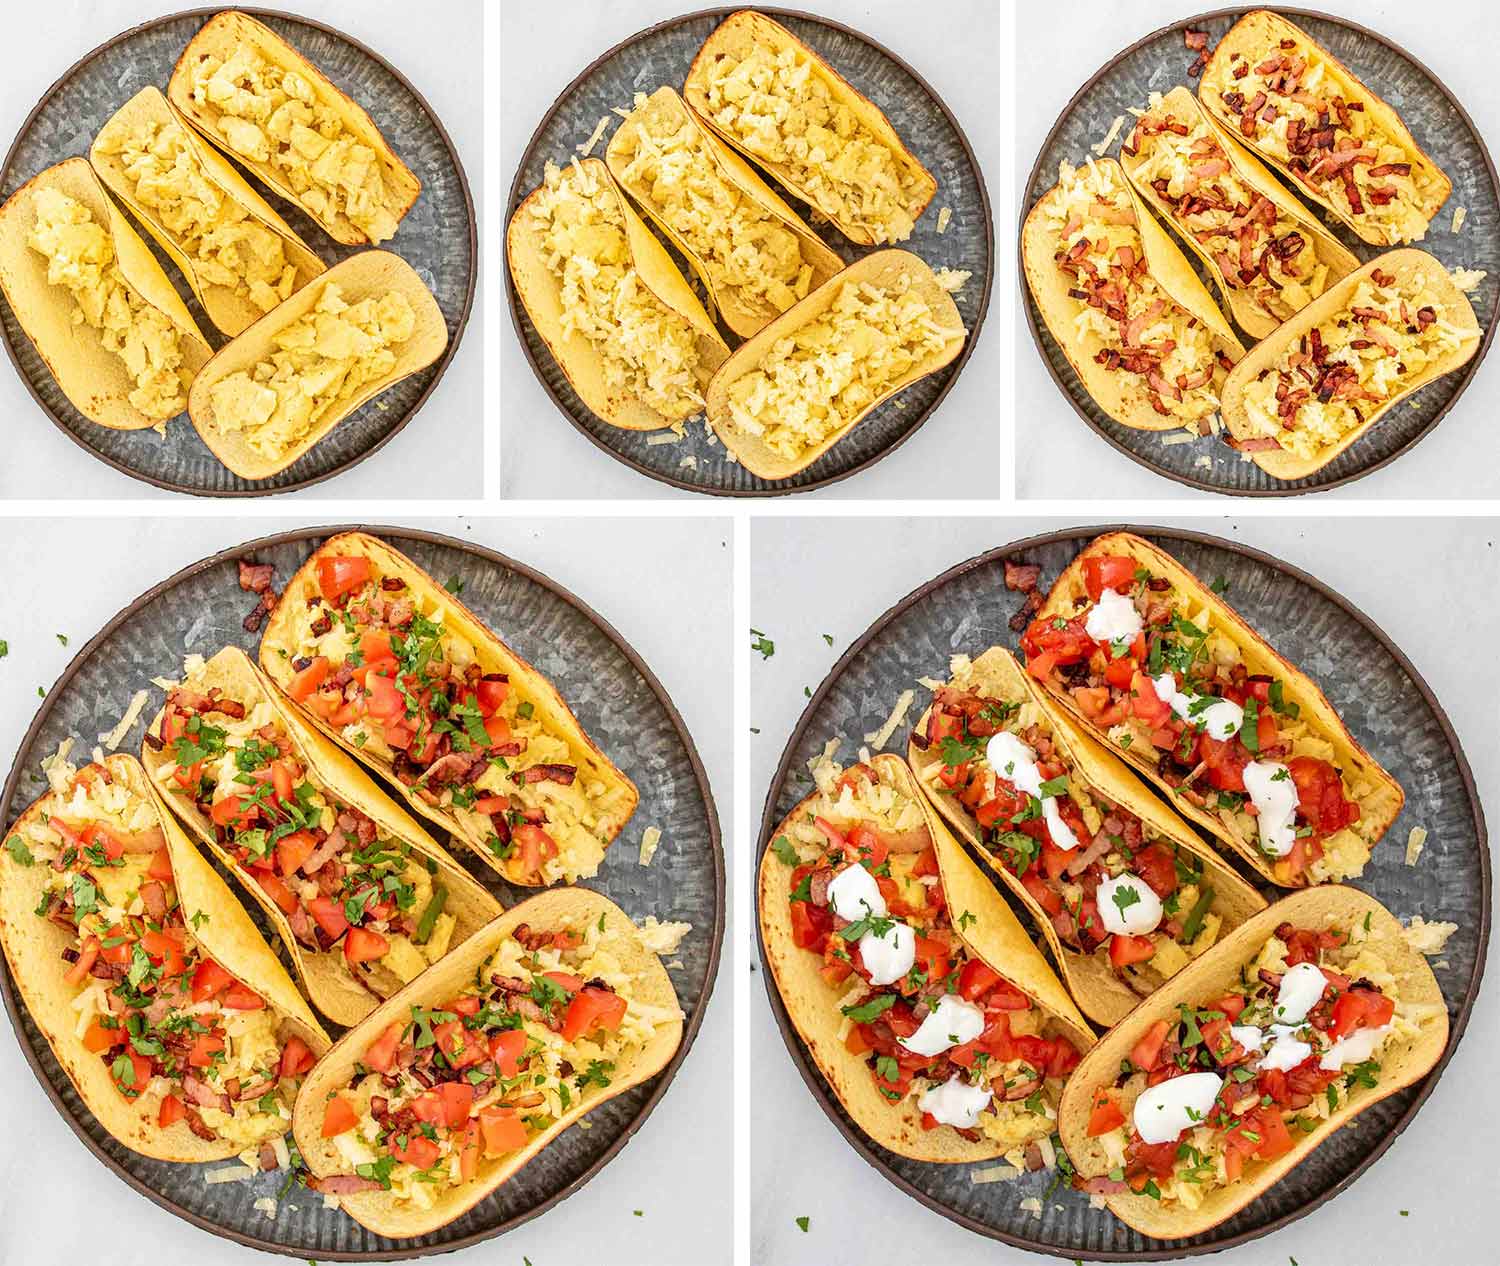 process shots showing how to make breakfast tacos.